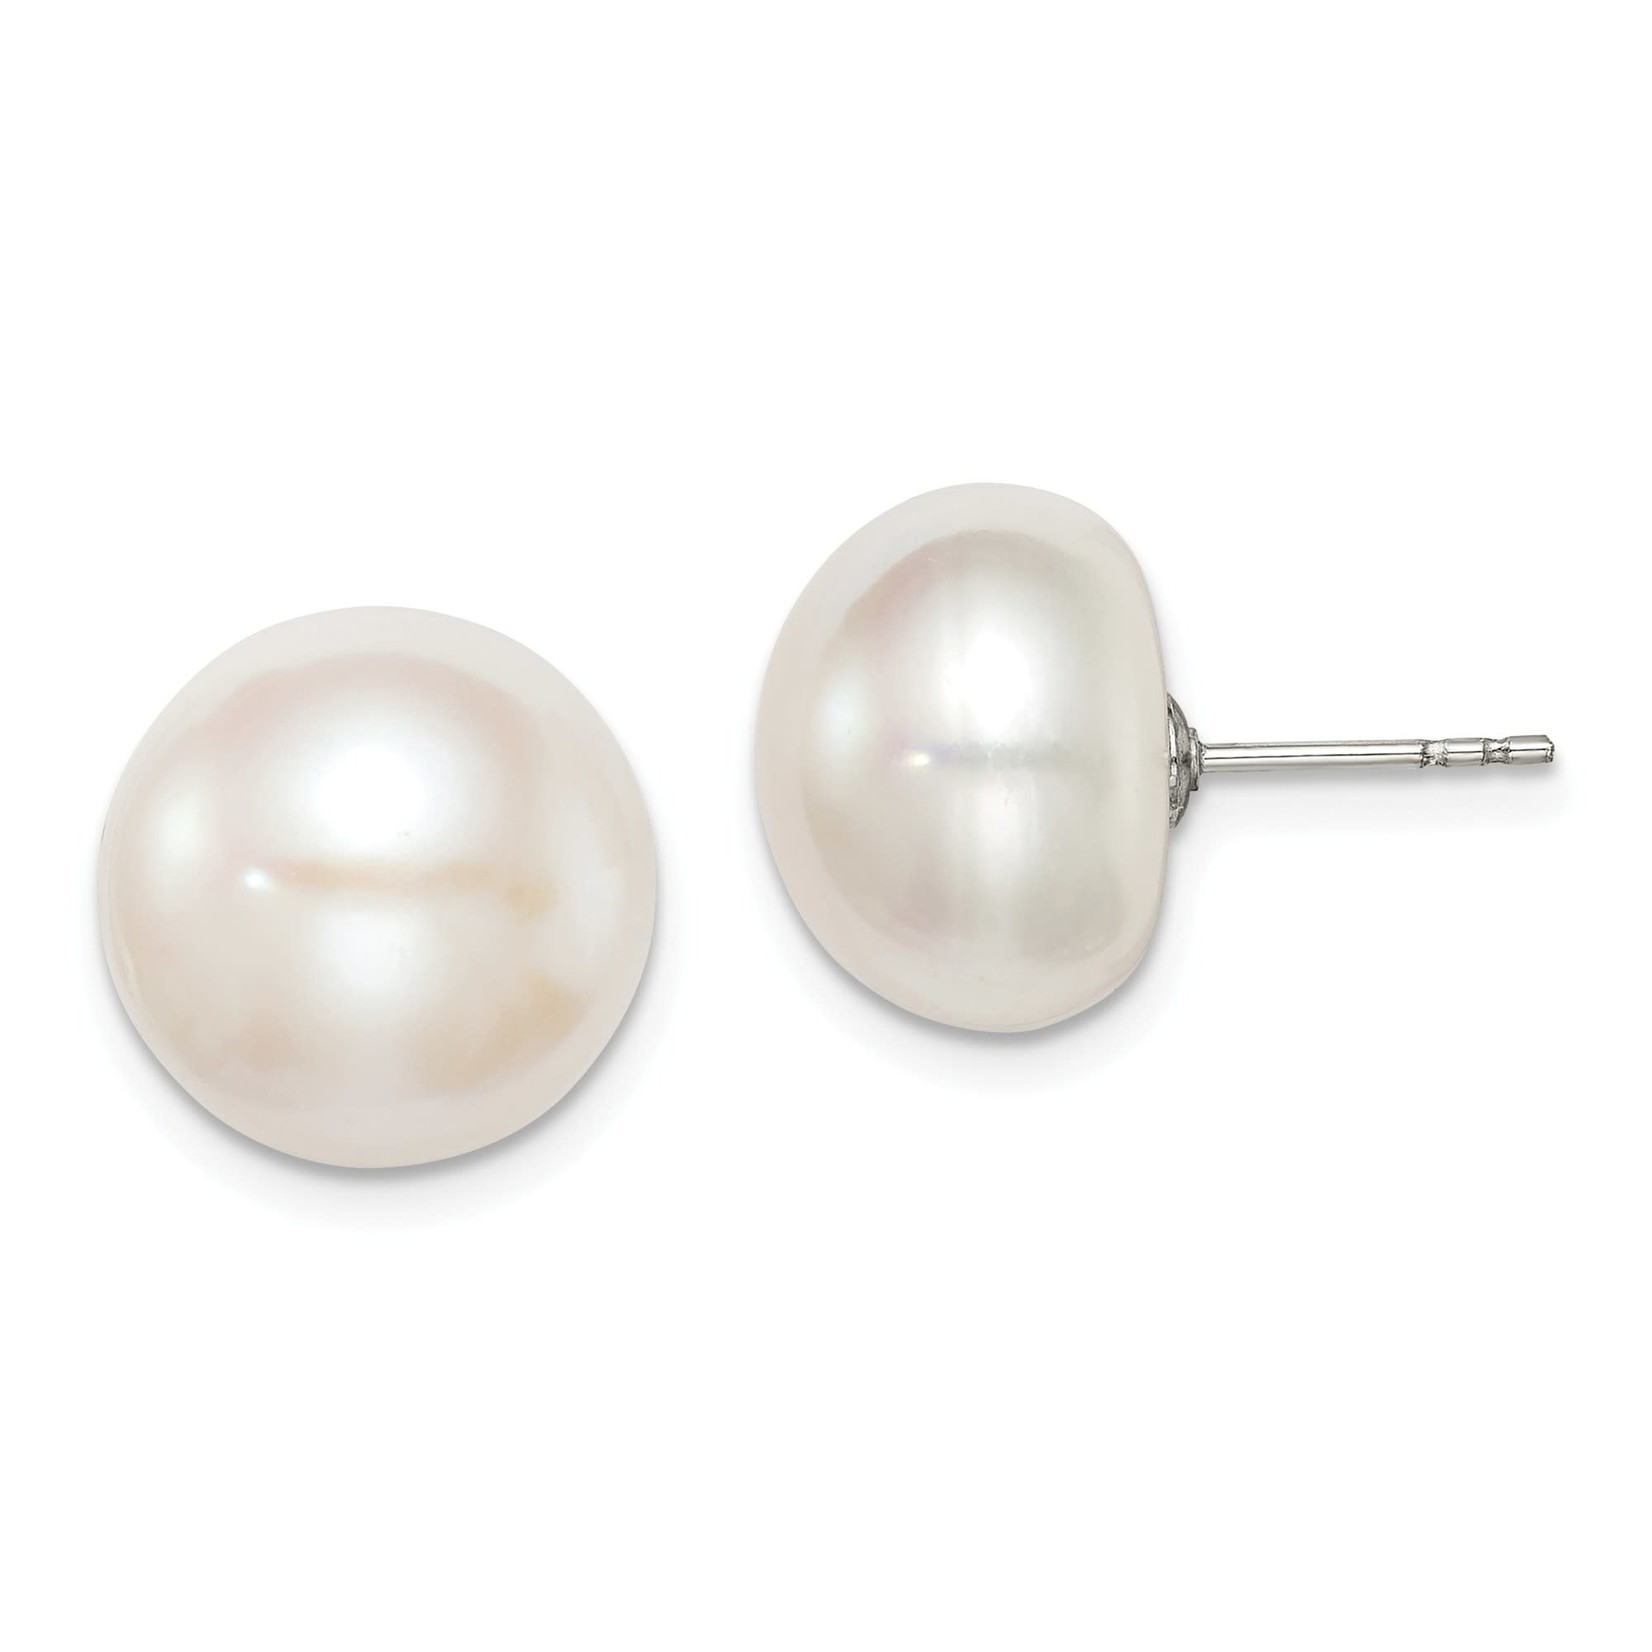 Cultured 13mm Round Button Pearl Stud Earrings